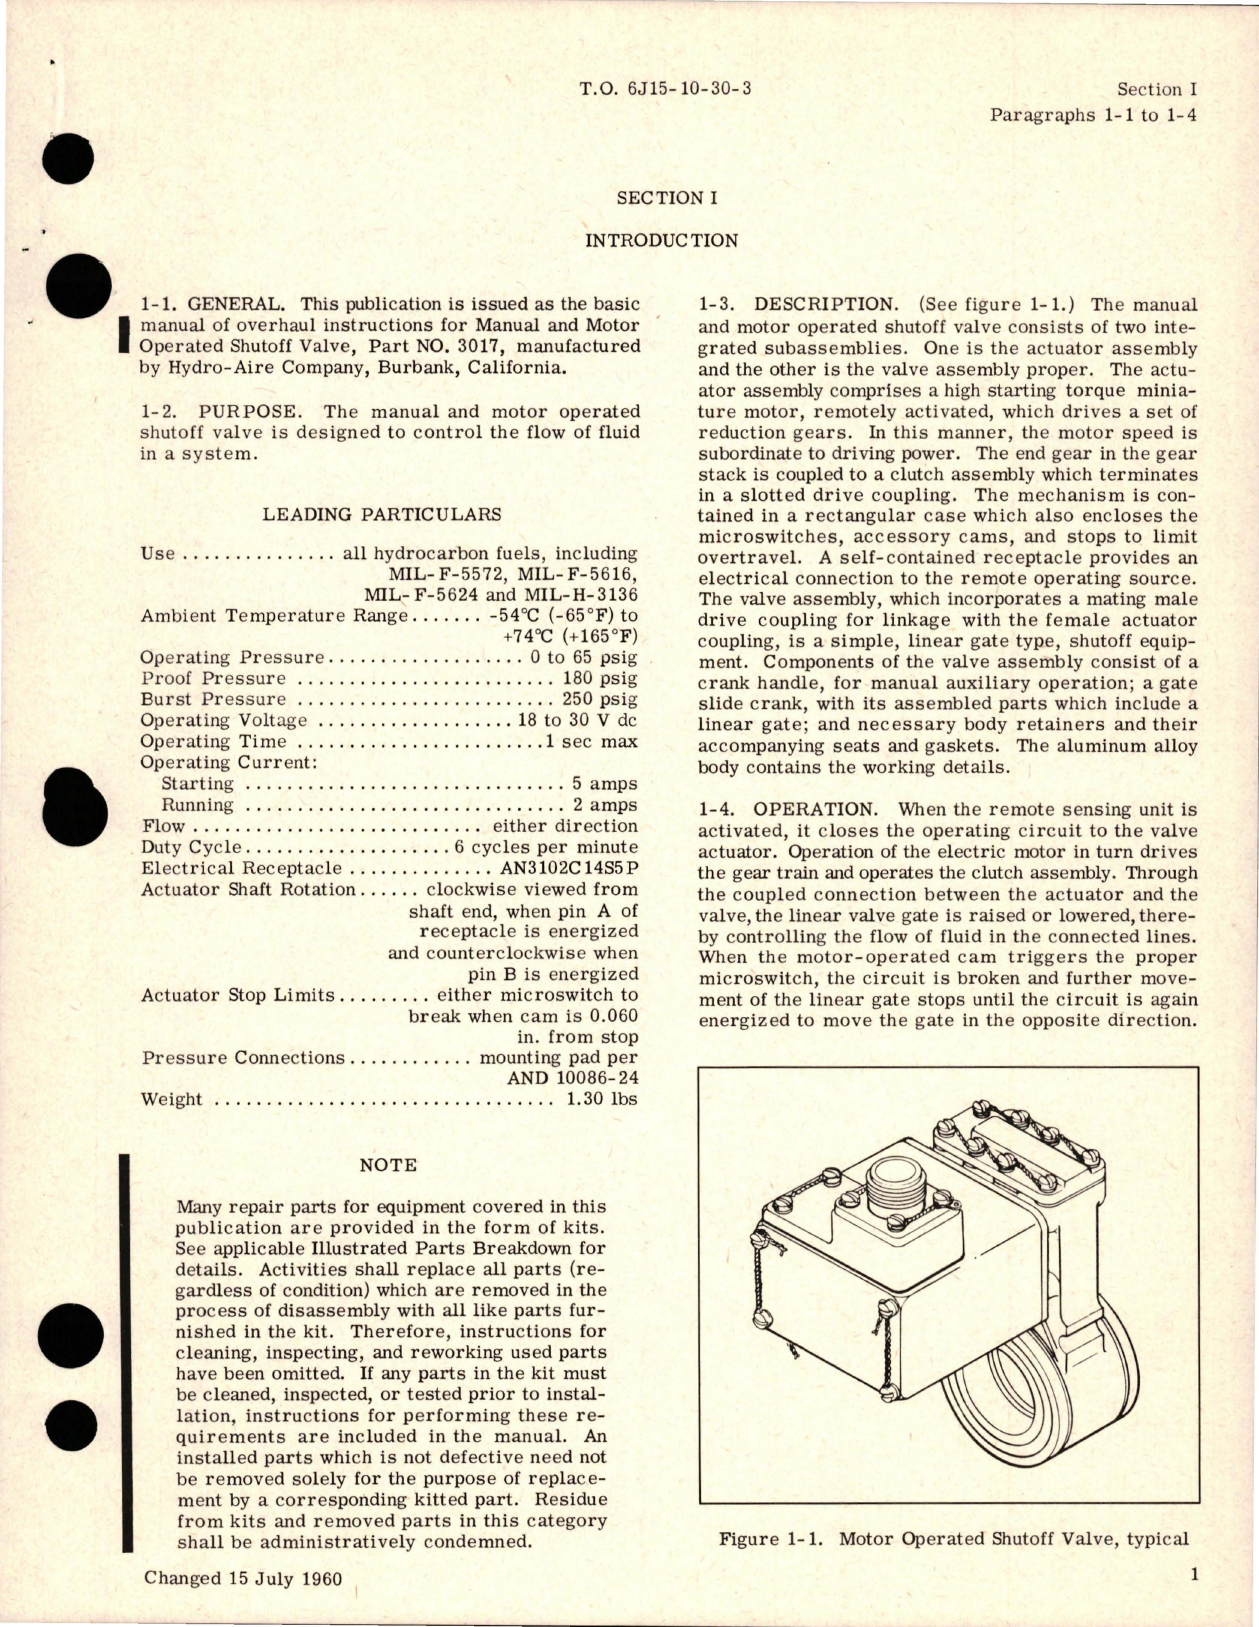 Sample page 5 from AirCorps Library document: Overhaul for Motor Operated Shutoff Valves